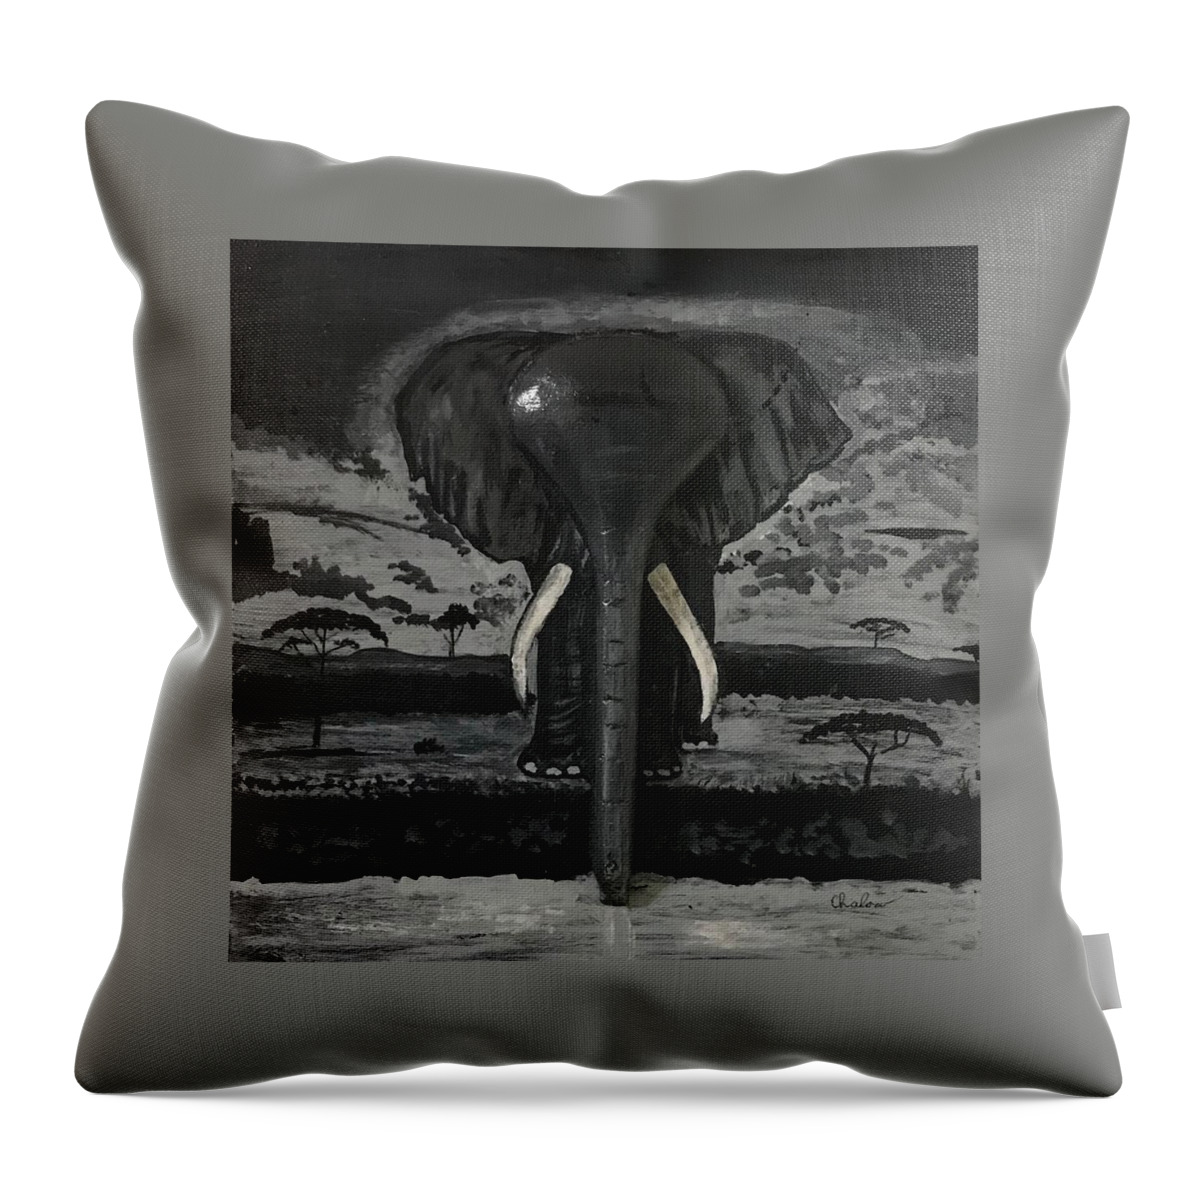  Throw Pillow featuring the painting Elephant Glory by Charles Young